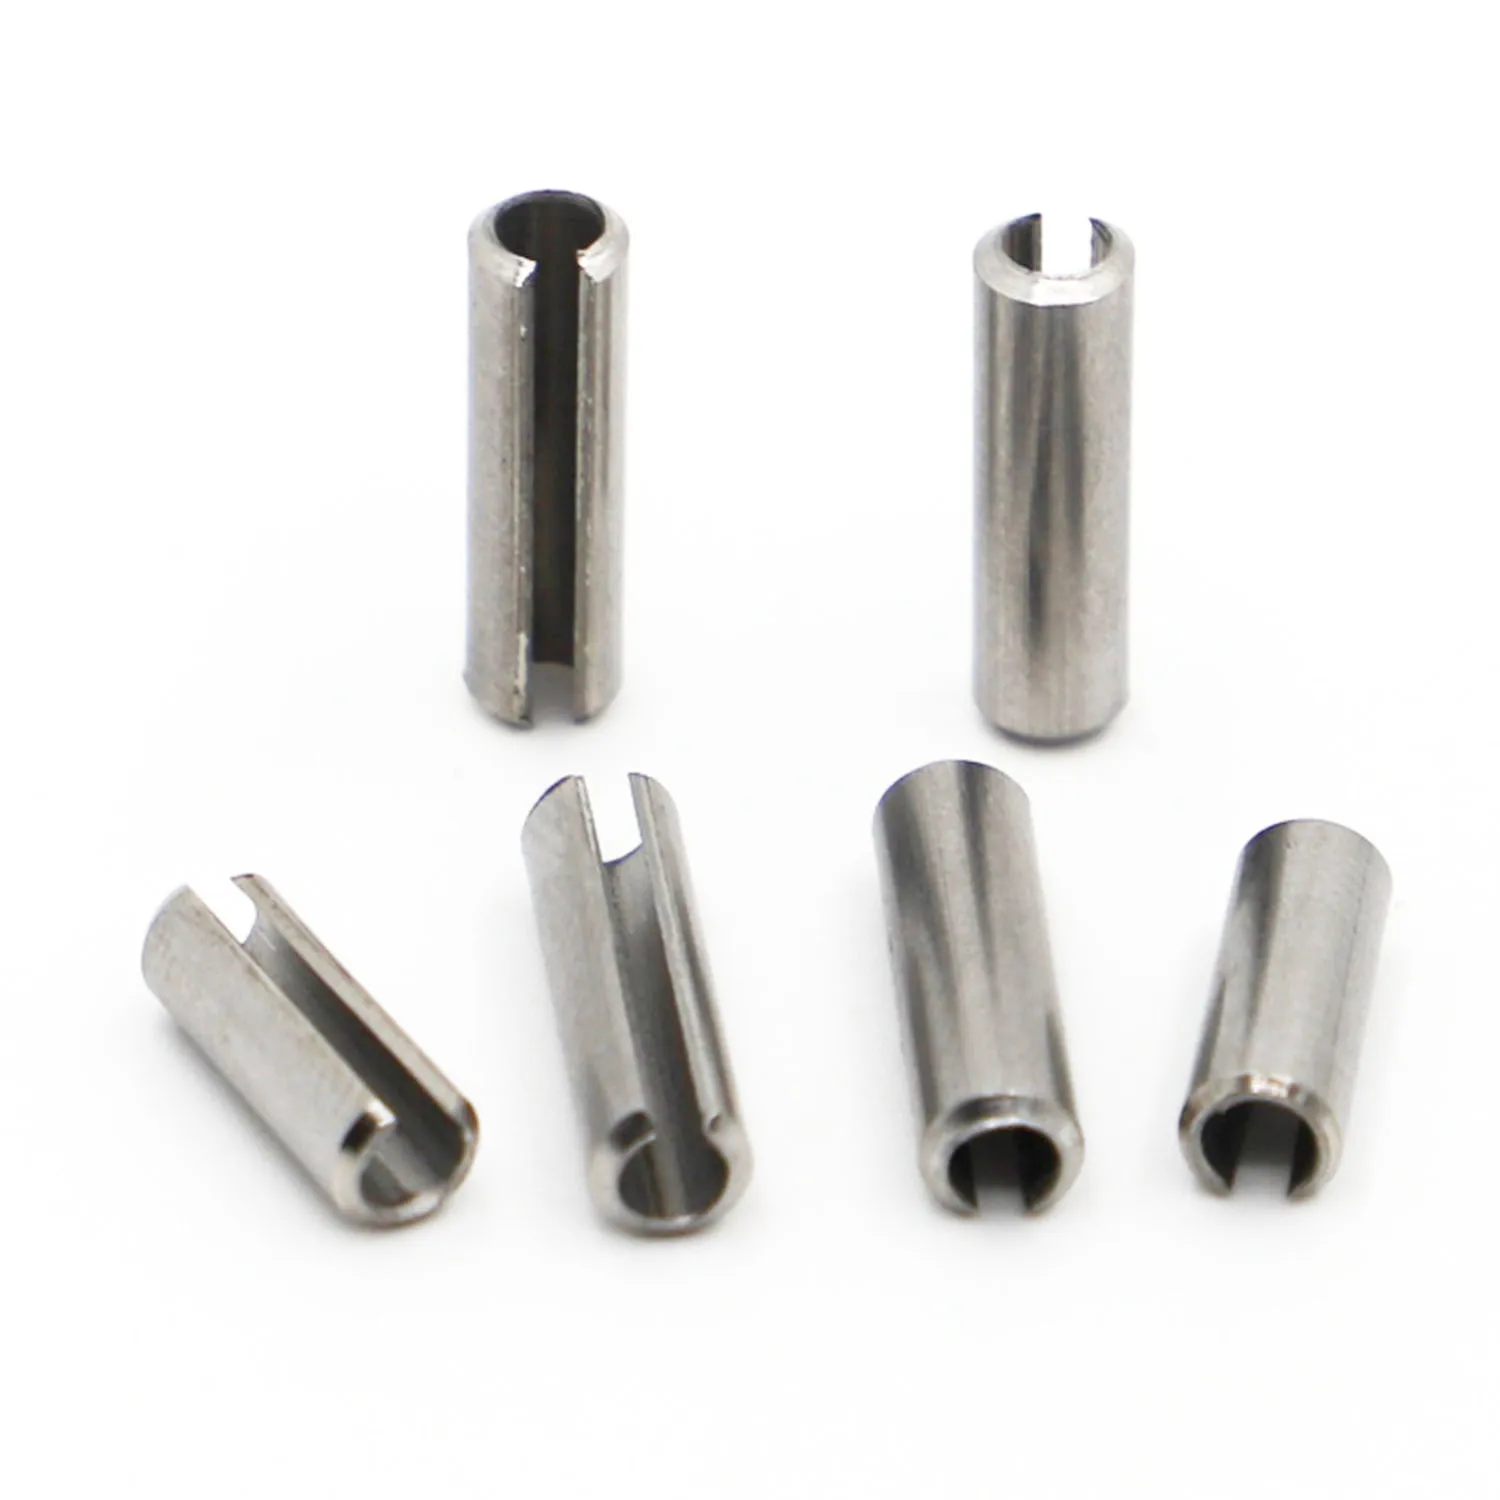 5pcs/Lot GB879 Spring pin Elastic Cylindrical Hollow pin Cotter pin Positioning pins M16x80mm 